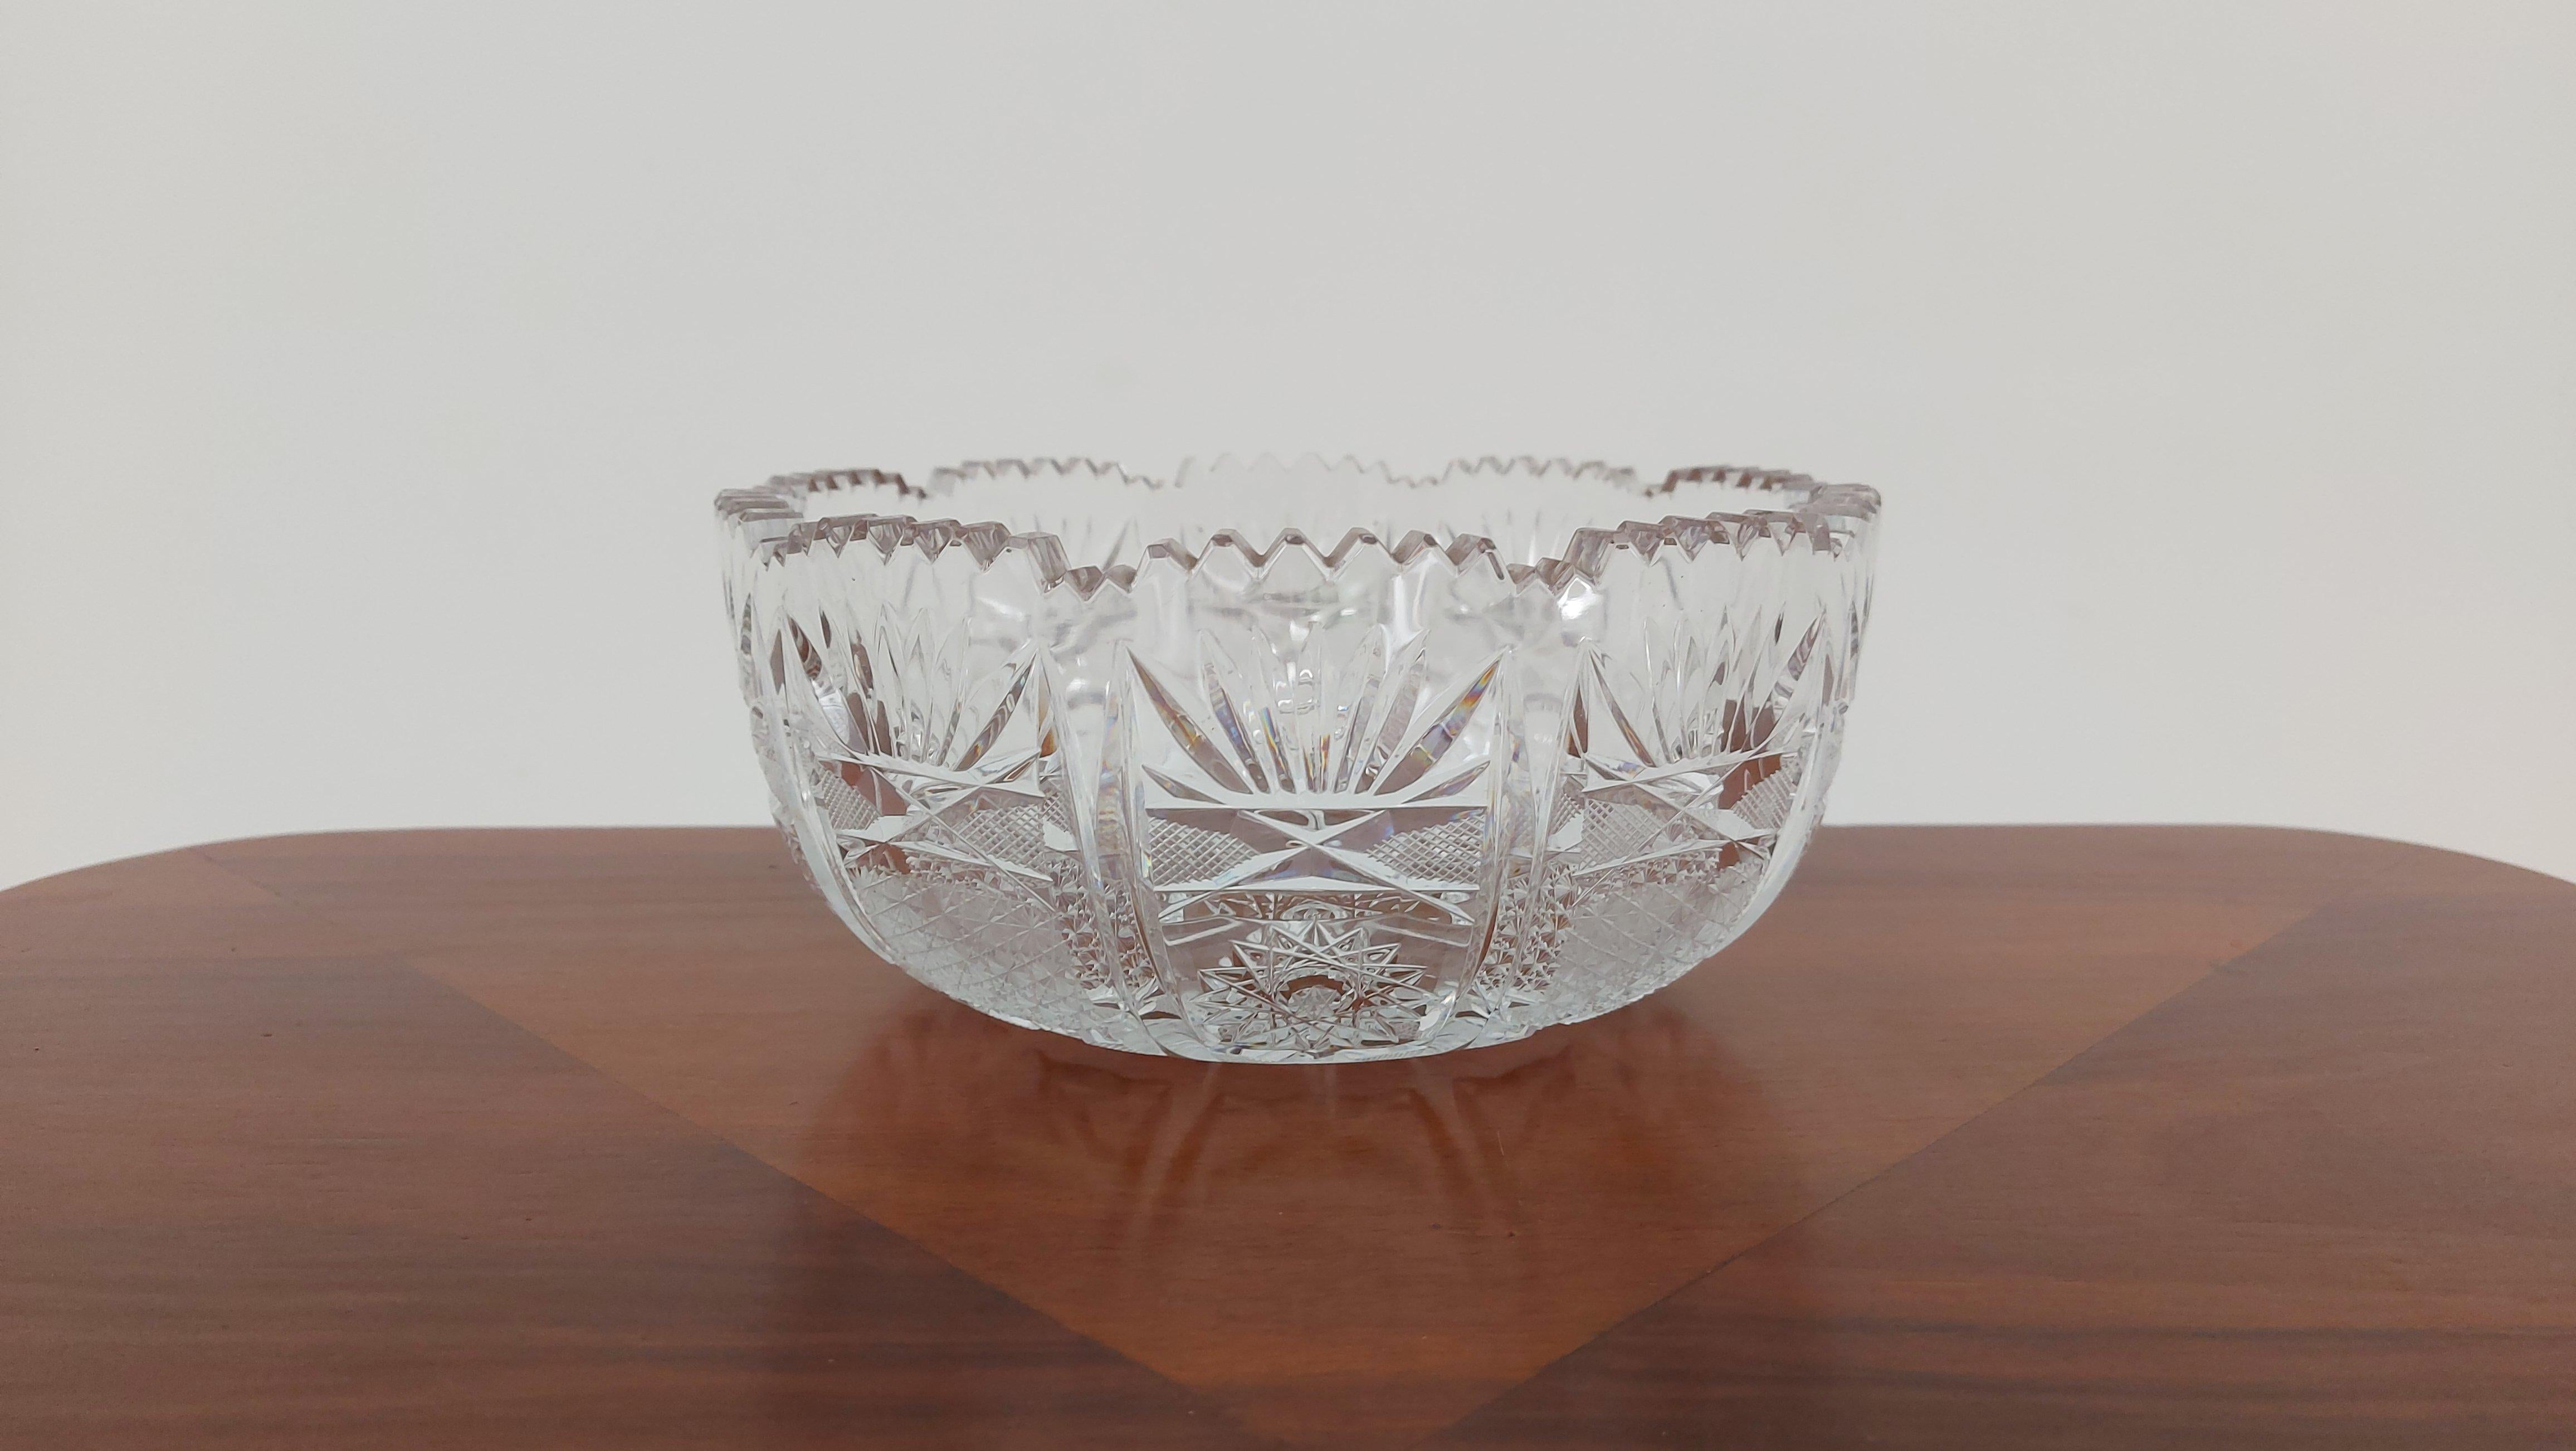 Crystal bowl for fruit or sweets.

Made in Poland in the 1950s / 1960s.

Very good condition.

Dimensions: height 9 cm / diameter 20.5 cm.